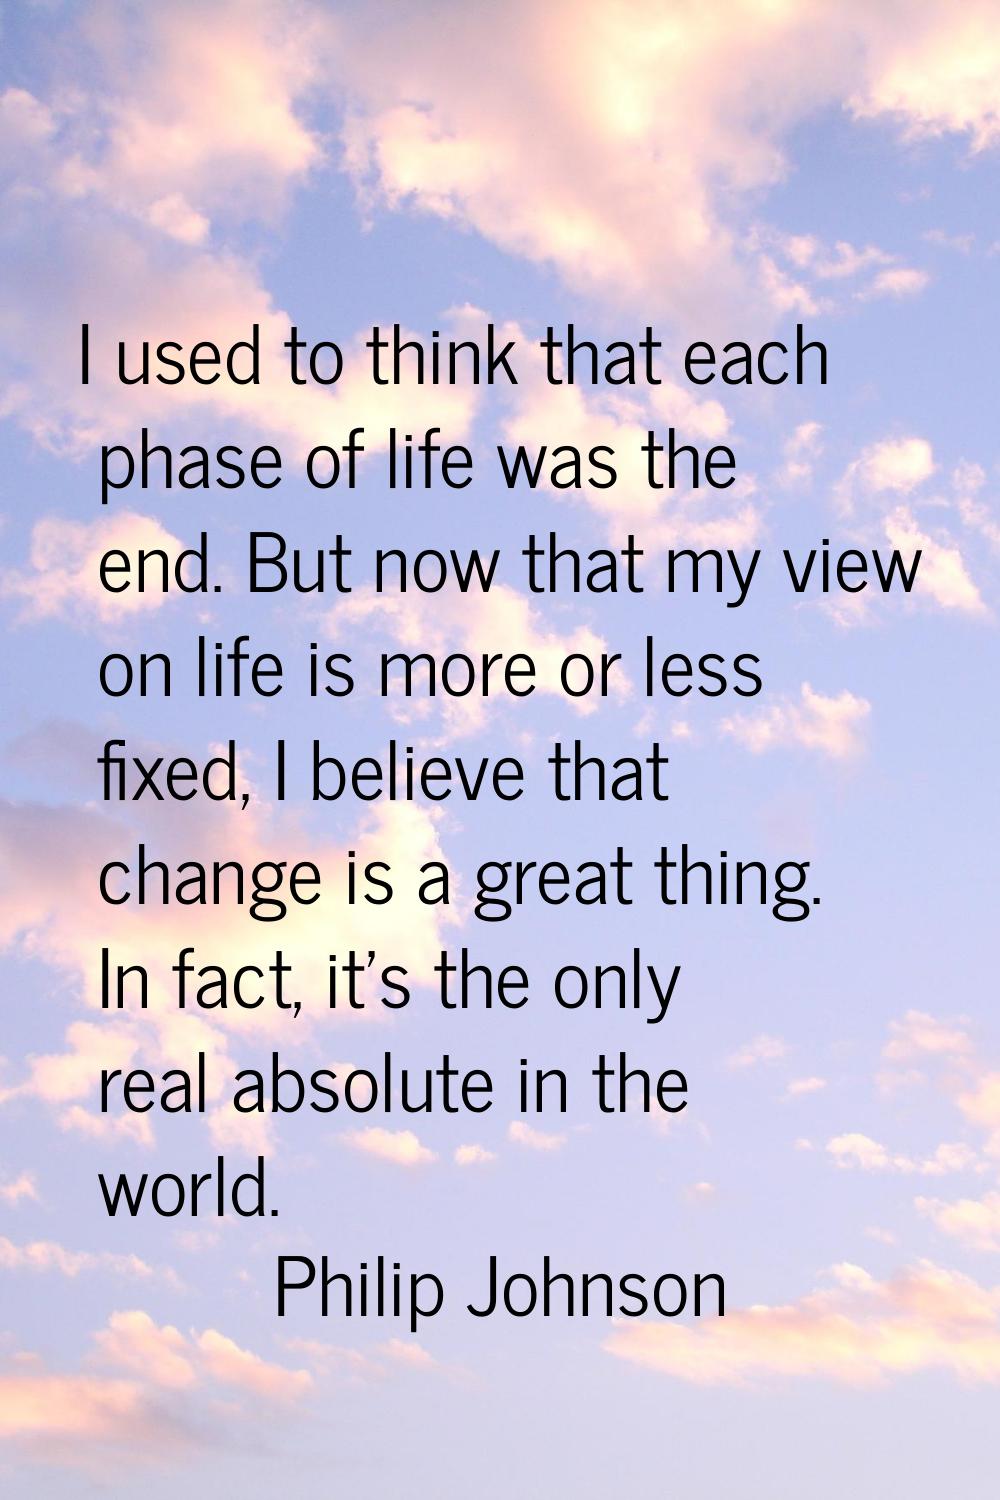 I used to think that each phase of life was the end. But now that my view on life is more or less f